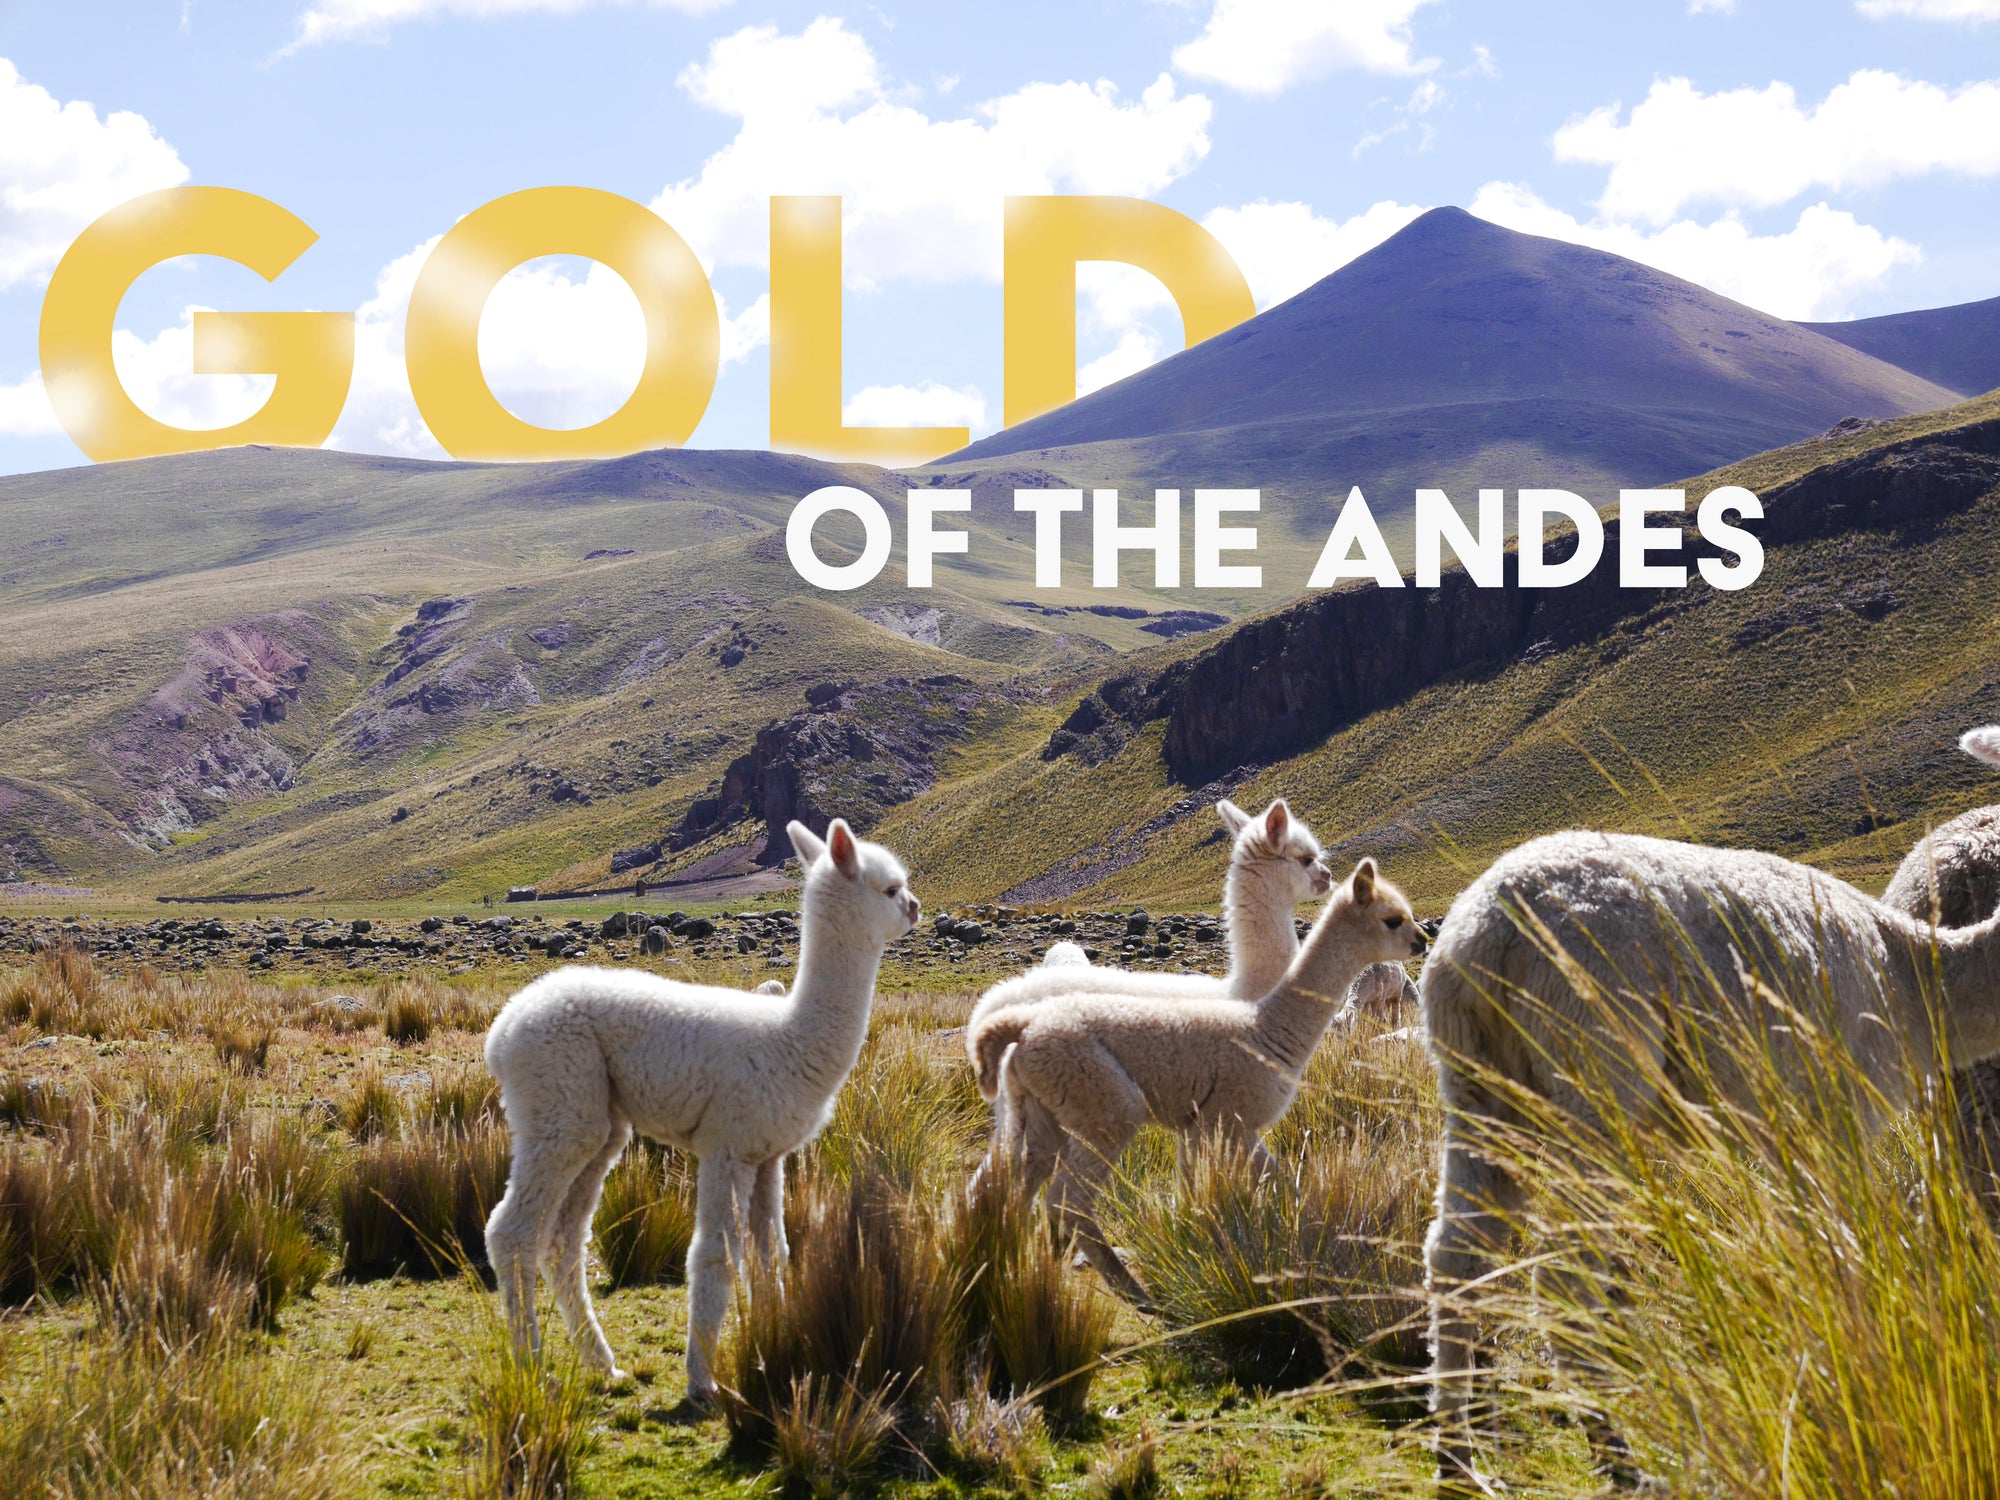 5 Reasons Why Alpaca Fleece Is The 'Gold Of The Andes'